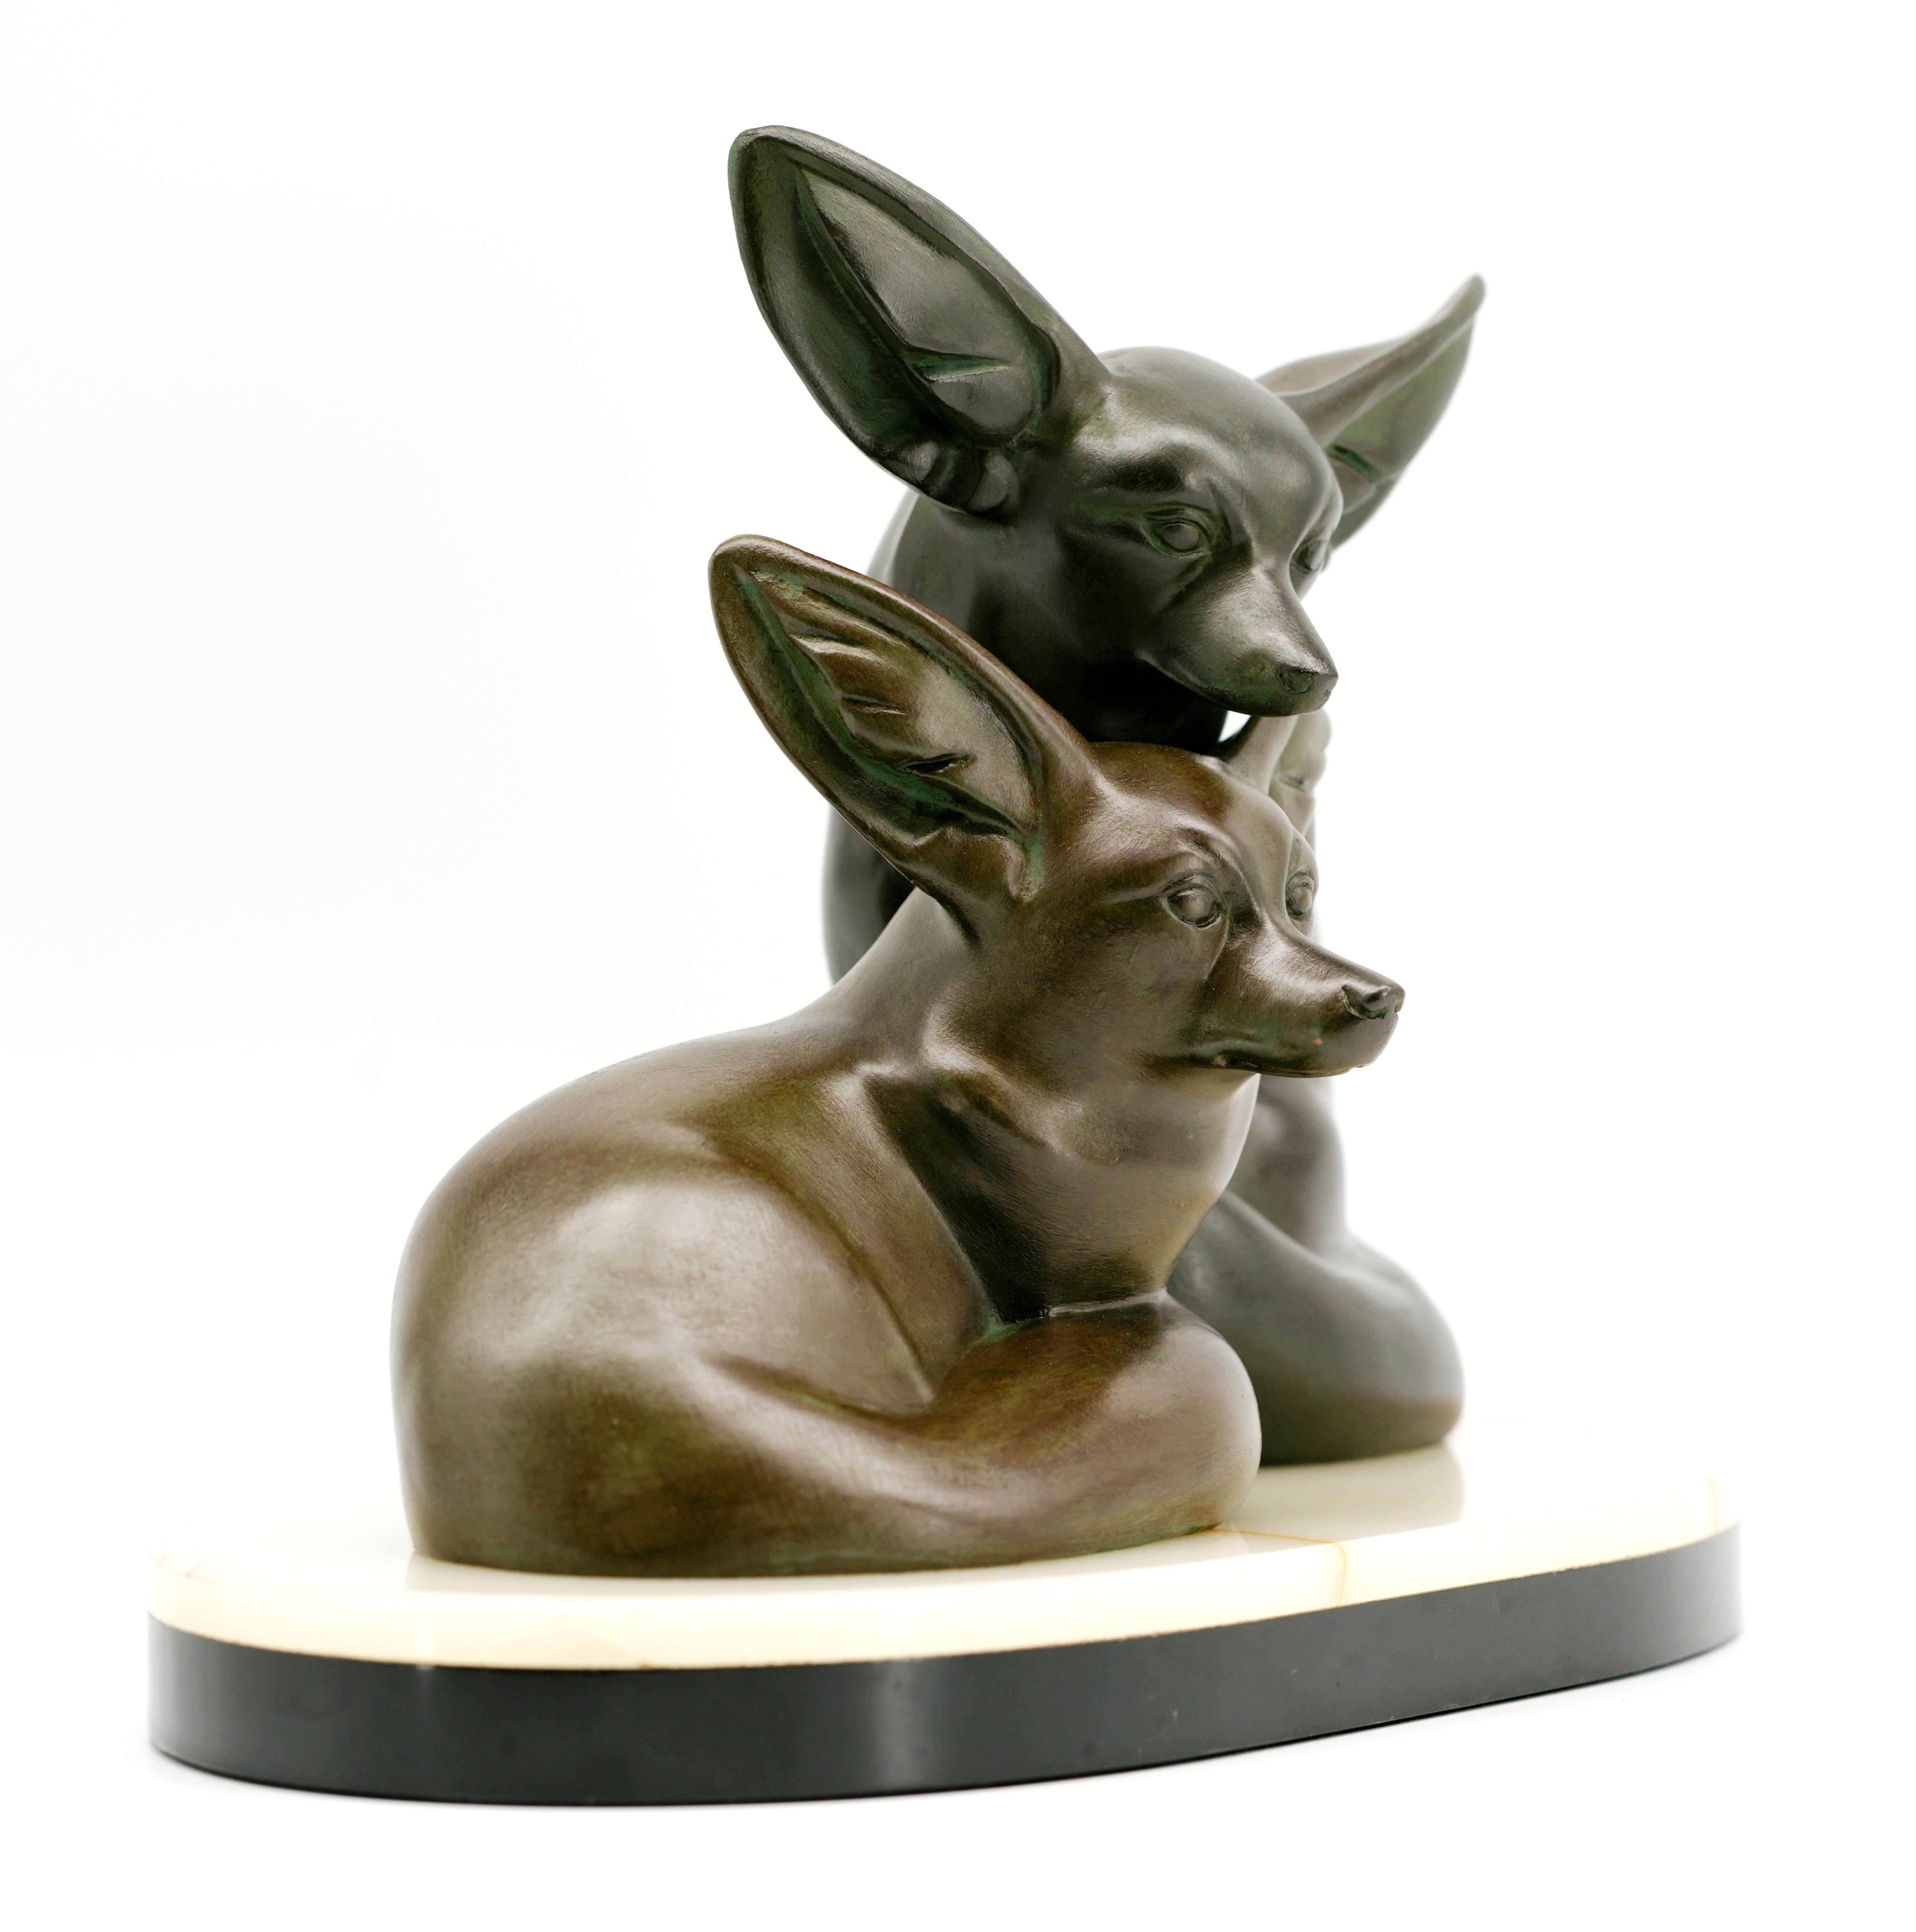 French Art Deco sculpture by Irenee Rochard (1906-1984), France, 1930s. Couple of fennecs. Spelter, oxyx and marble. Double patina (one for each fennec). Width : 13.6